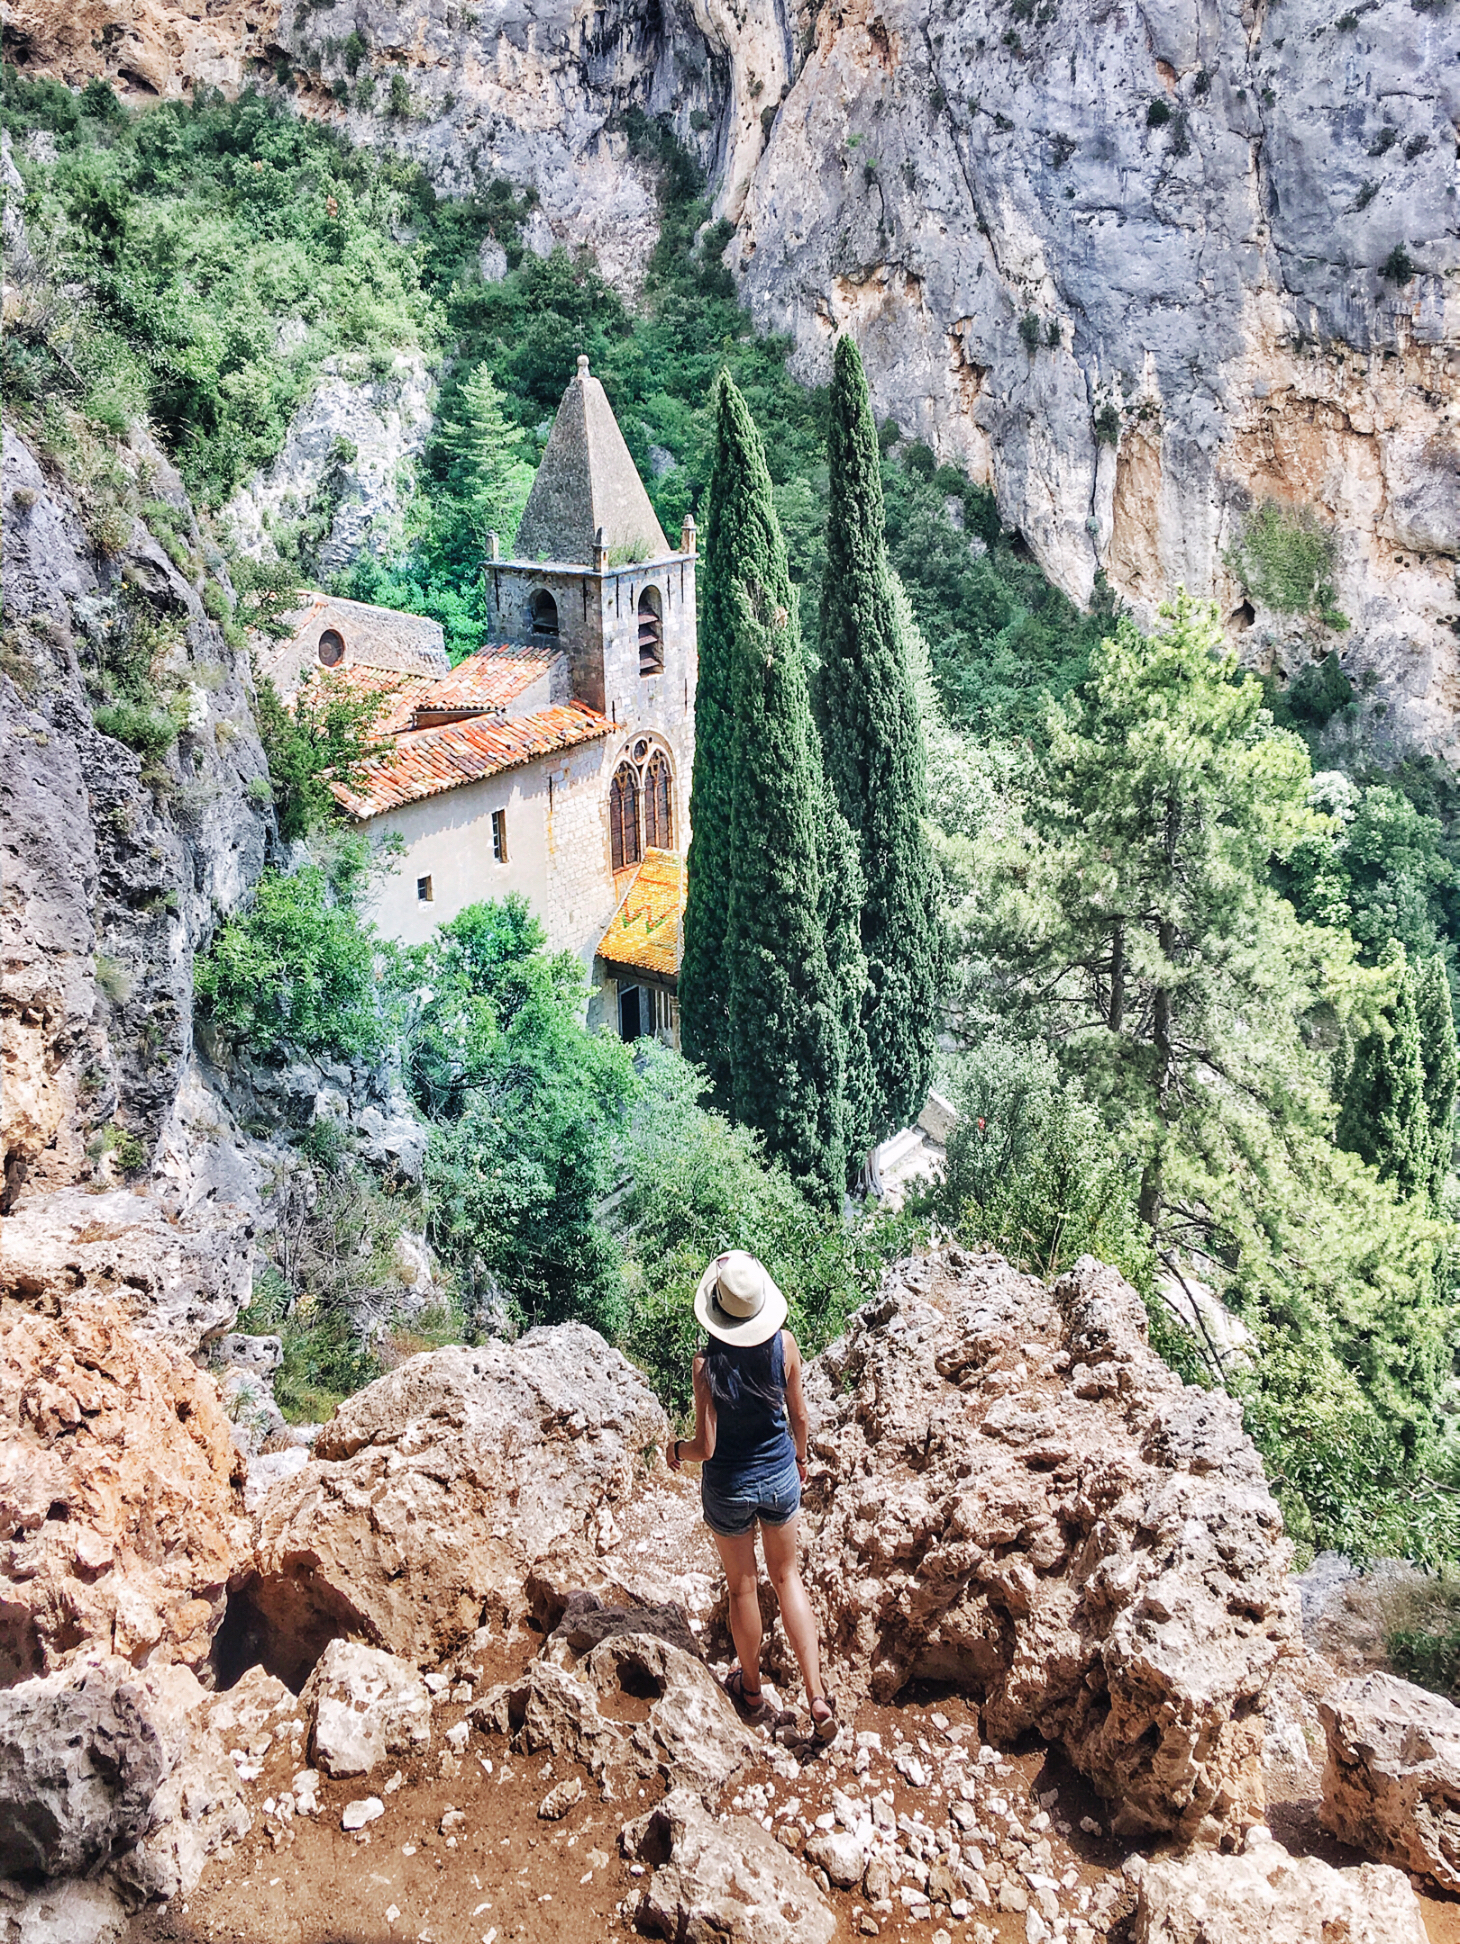 15 Photos That Will Inspire You to Visit Moustiers, France